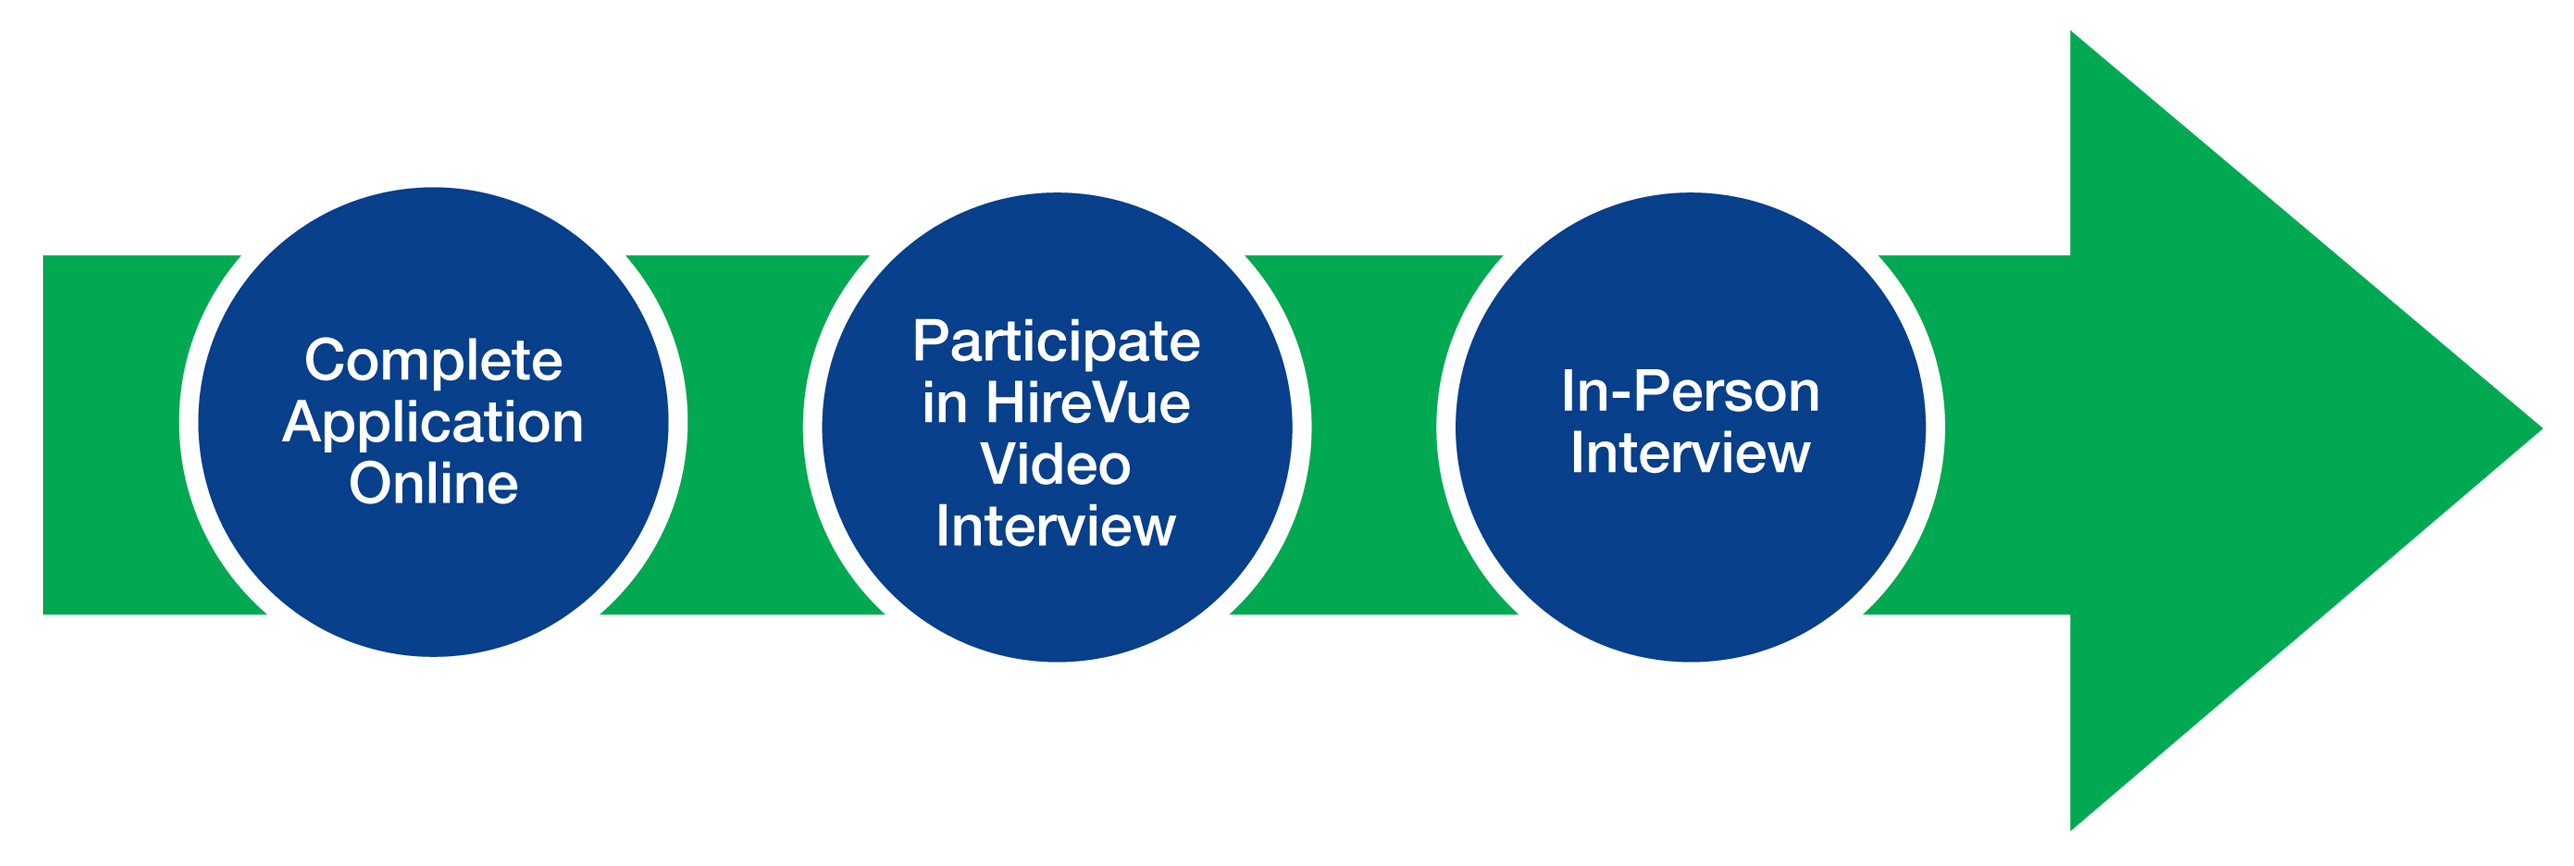 Complete Application Online. Participate in HireVue Video Interview, In-Person Interview